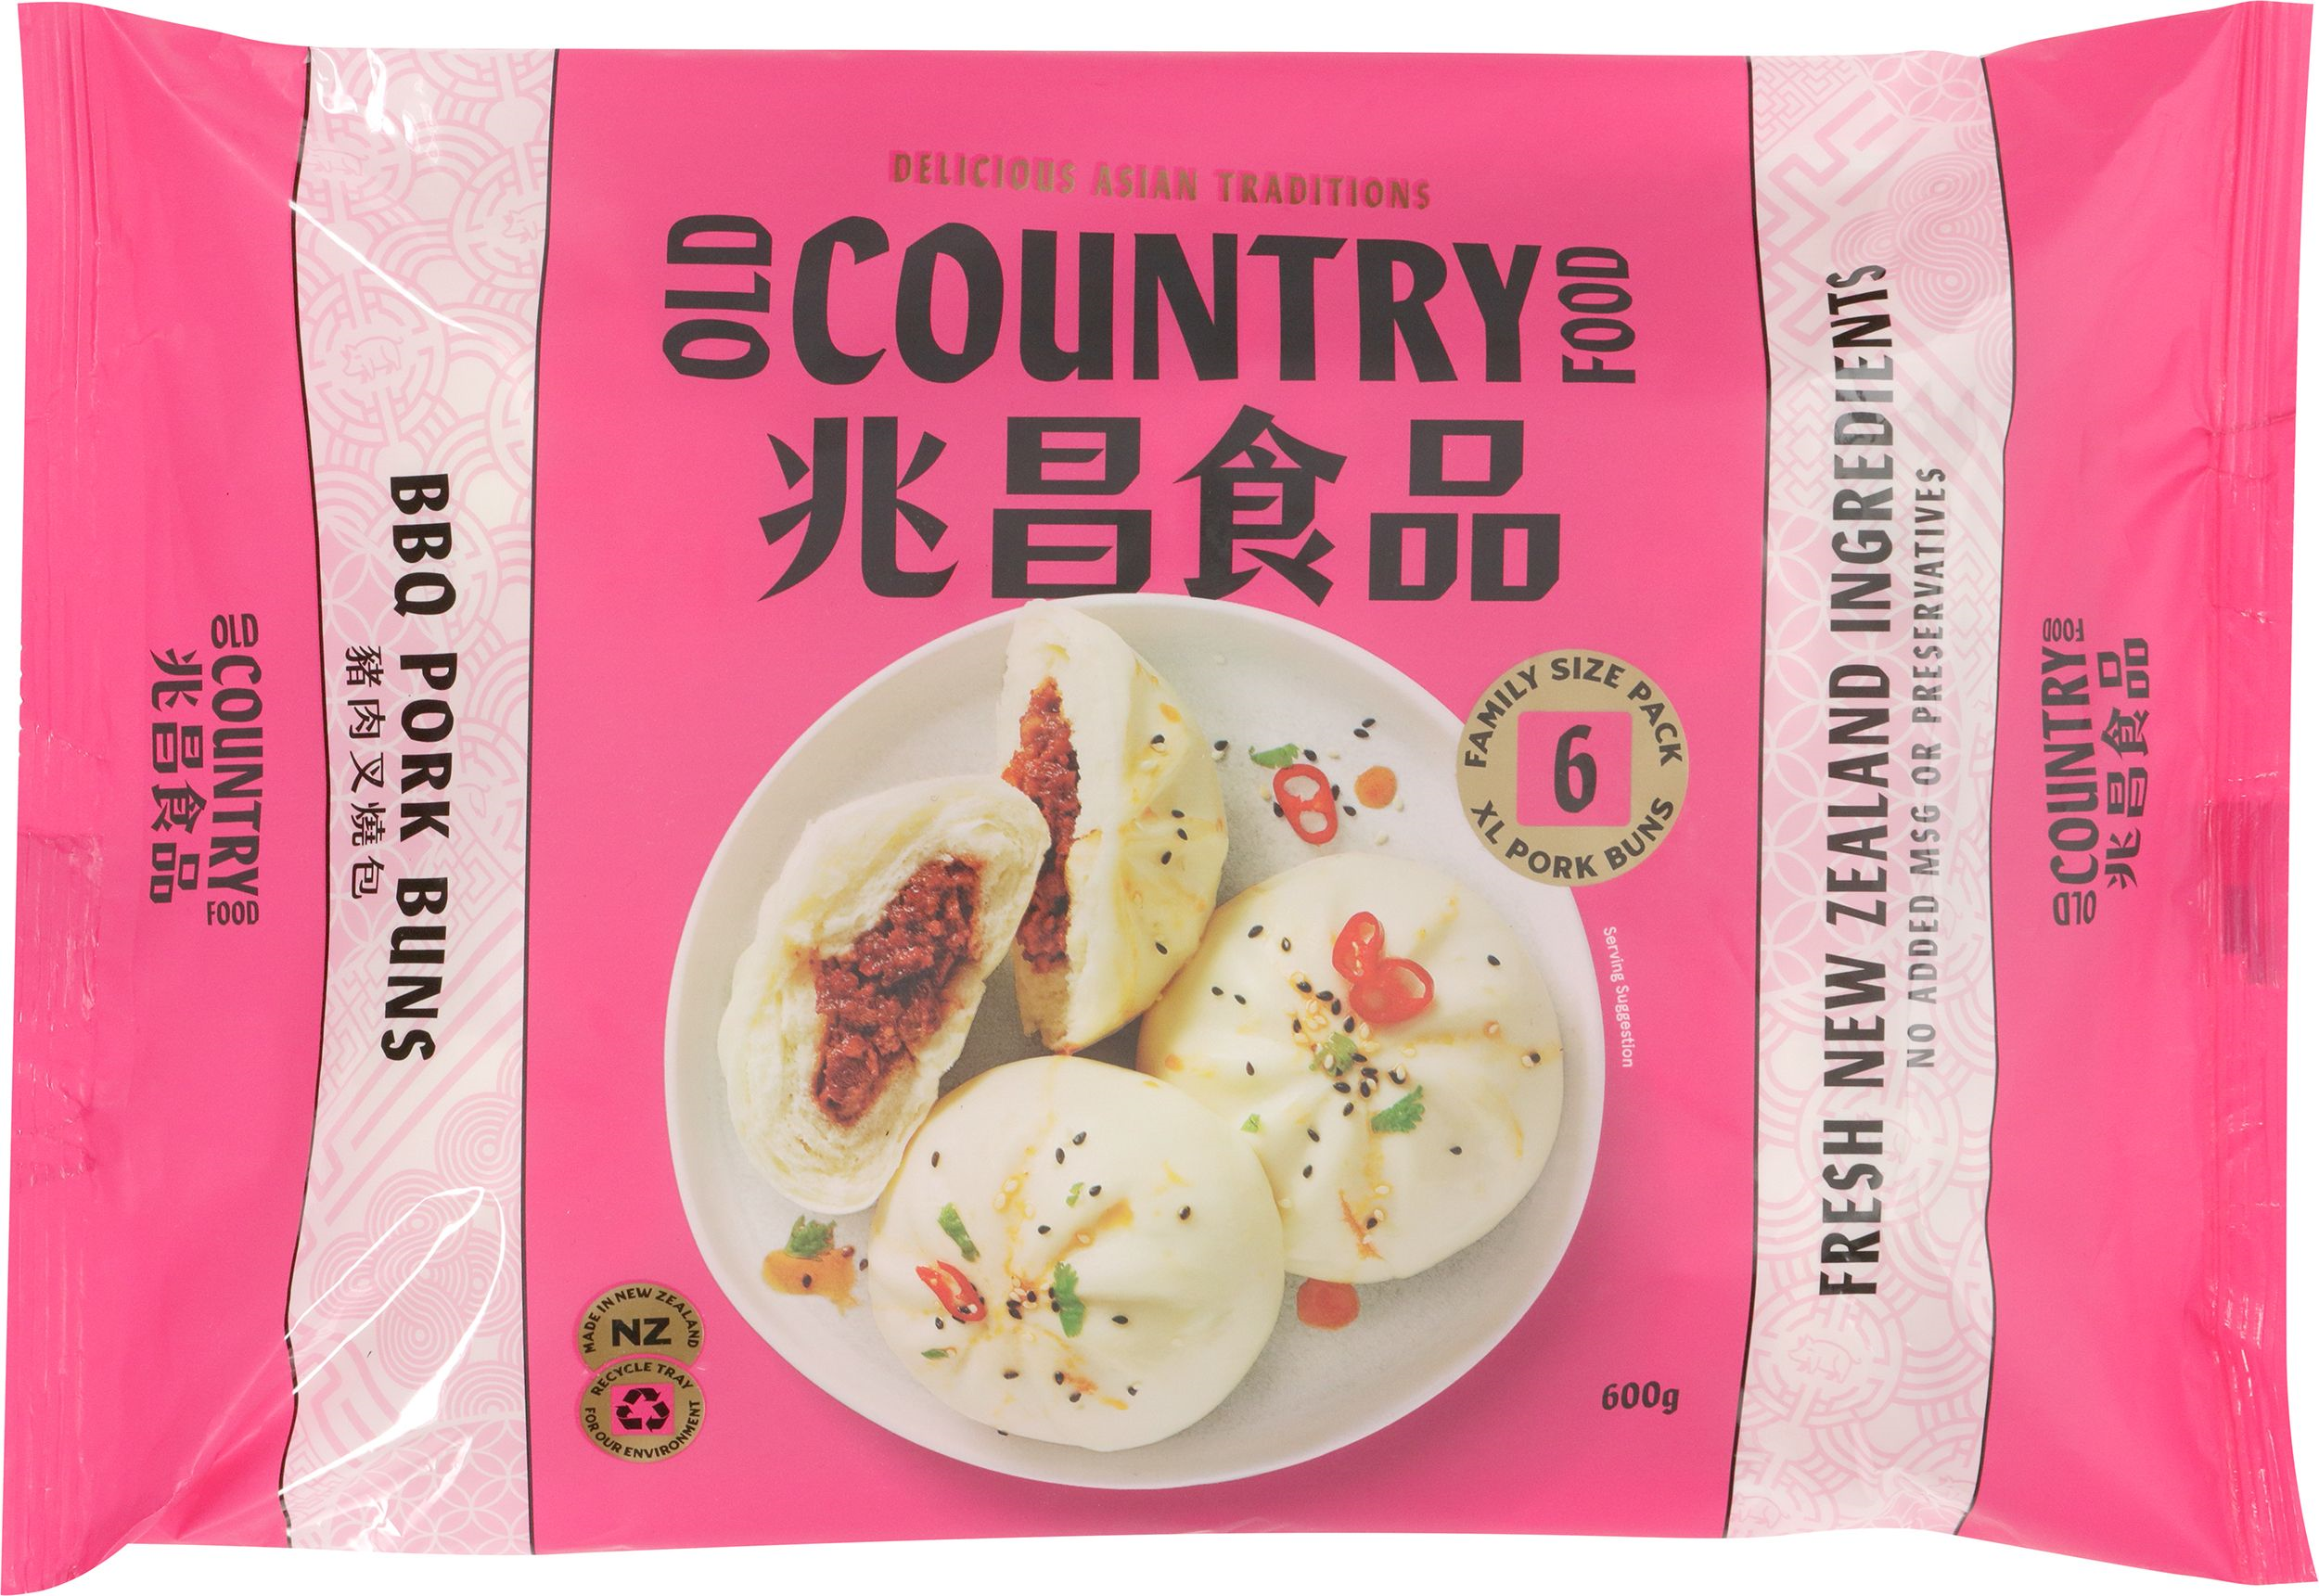 Old Country Road BBQ Pork Buns (100g) 6 pack